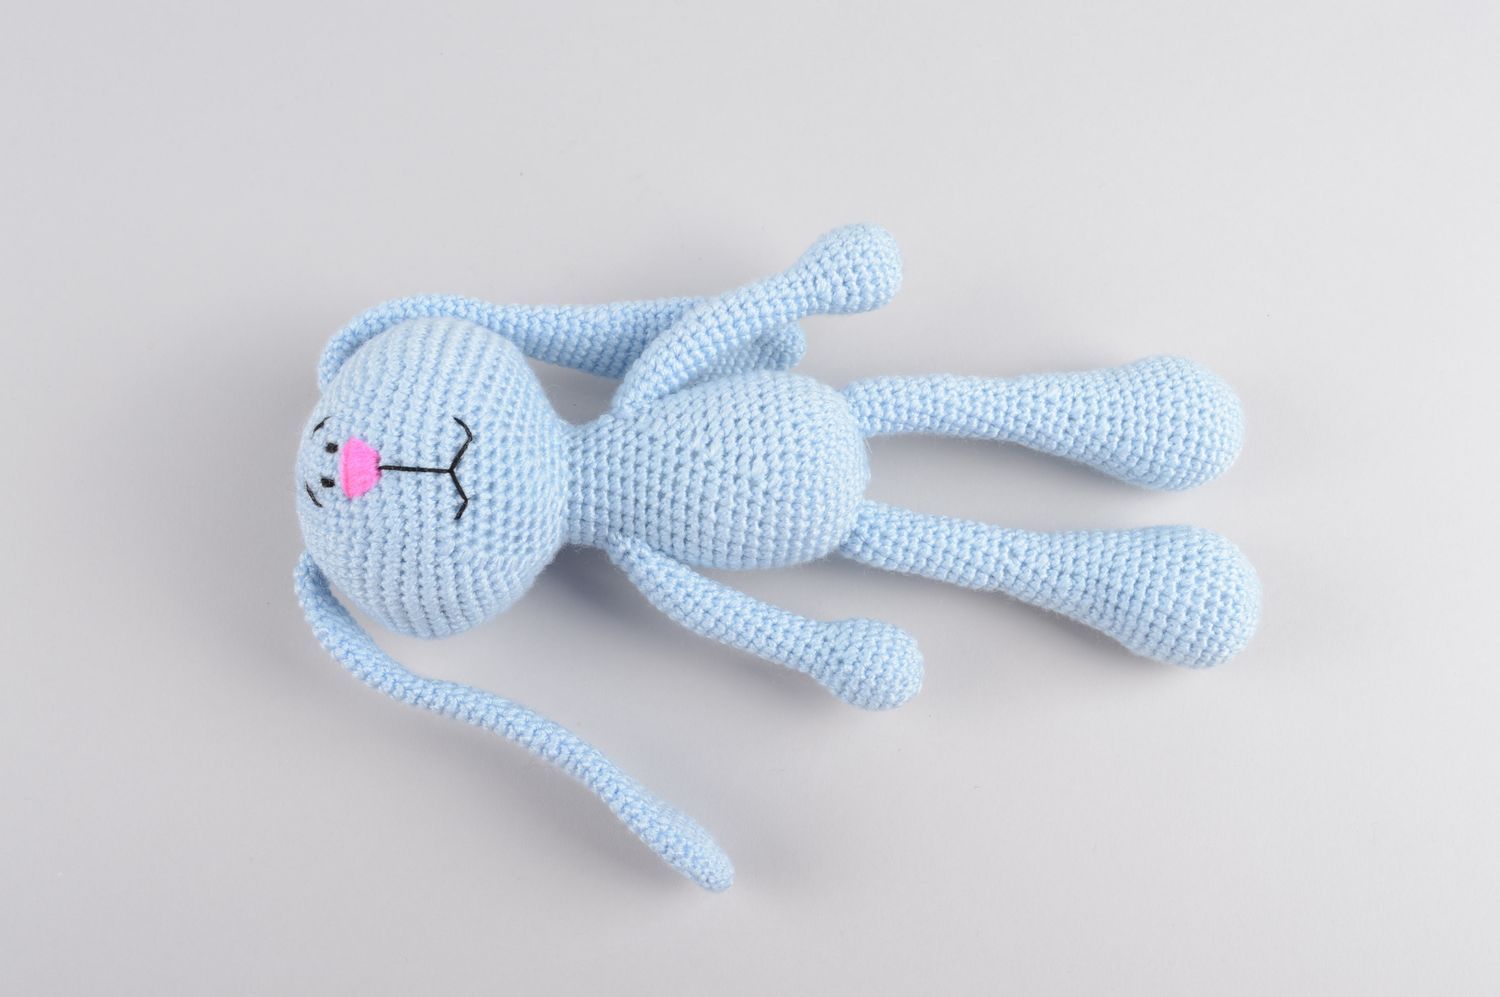 Blue handmade soft toy crochet toy for kids birthday gift ideas cool rooms photo 4